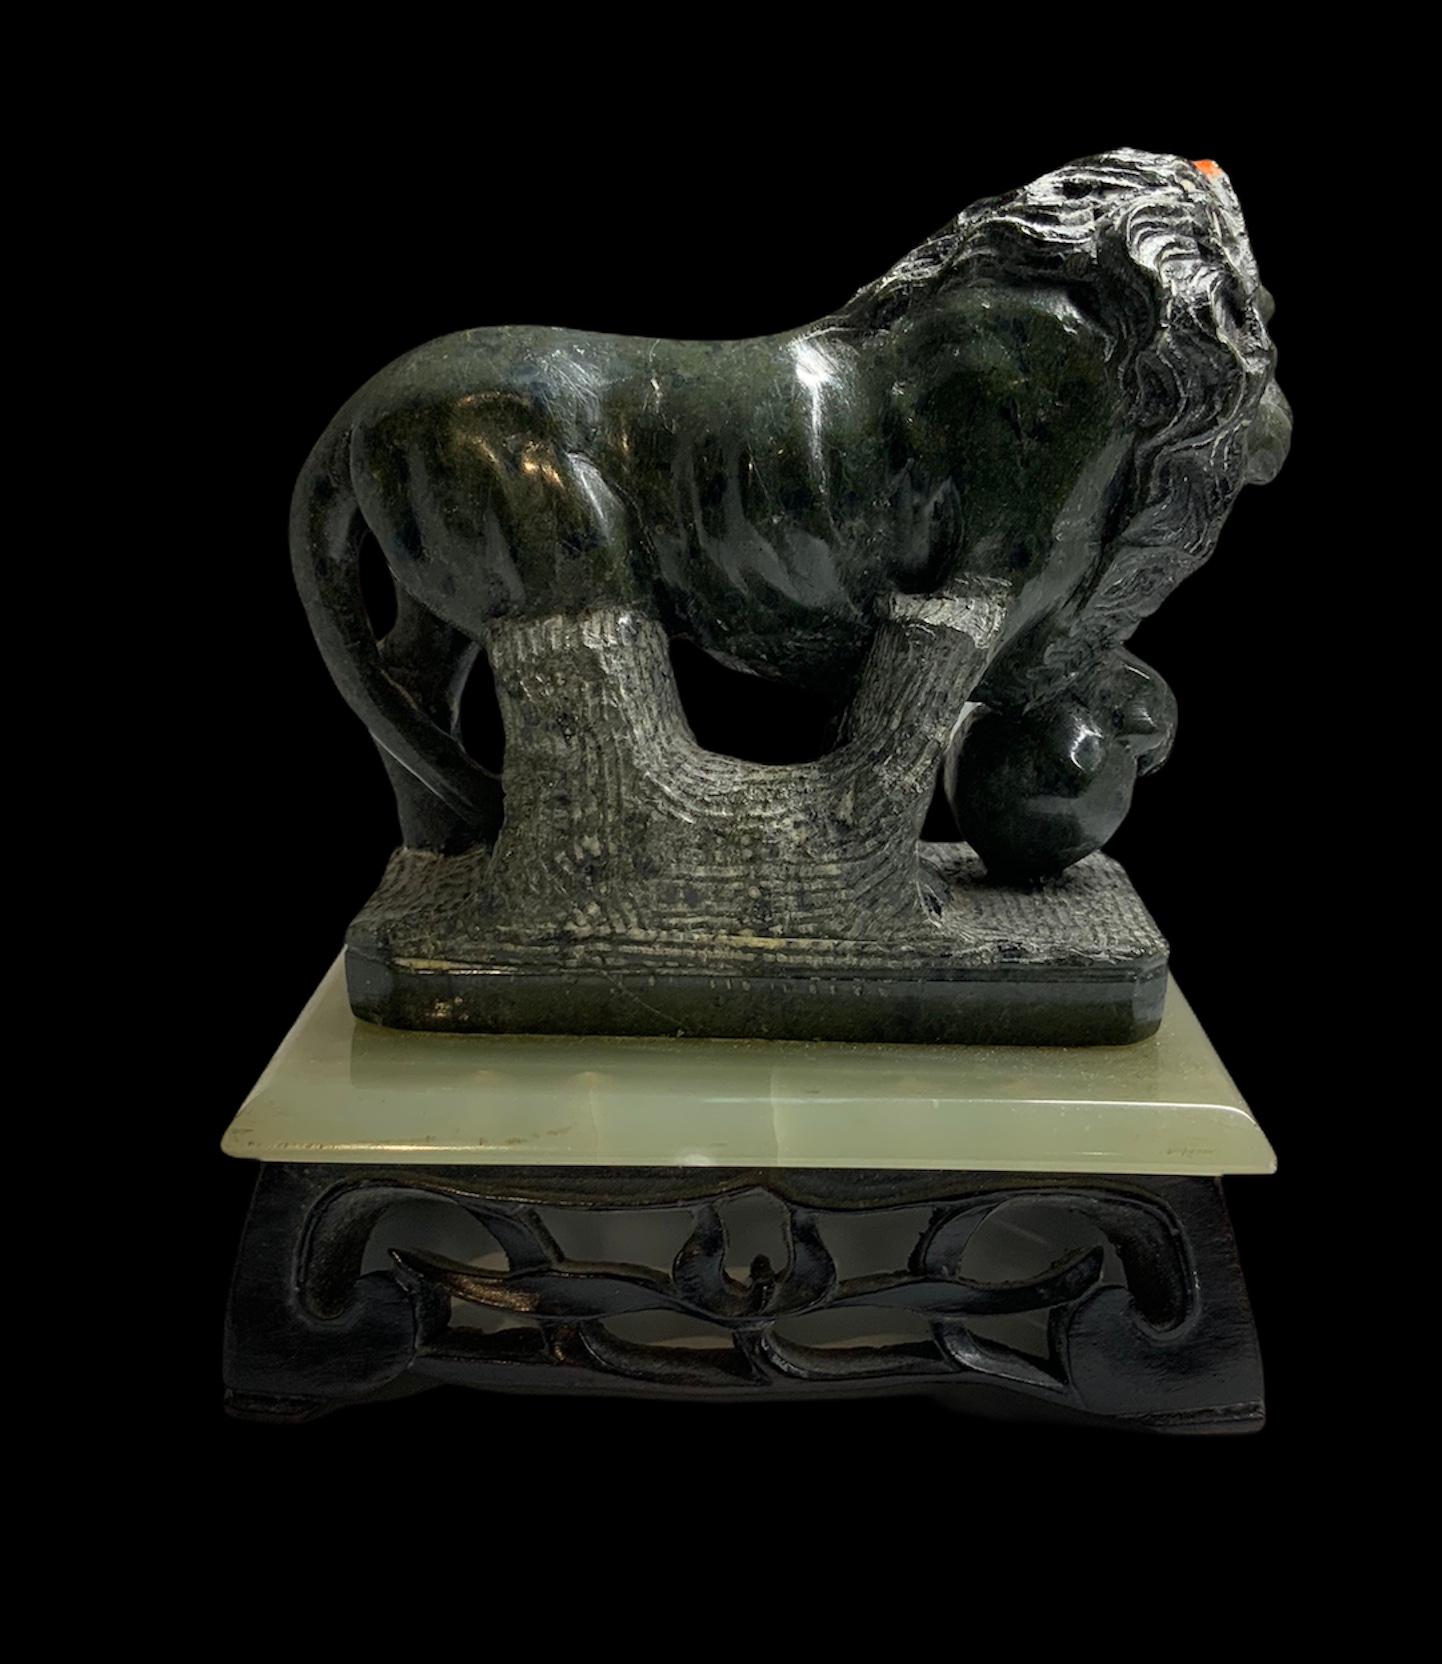 Carved Medici Lion Stone Sculpture After the Antique Ones in Florence